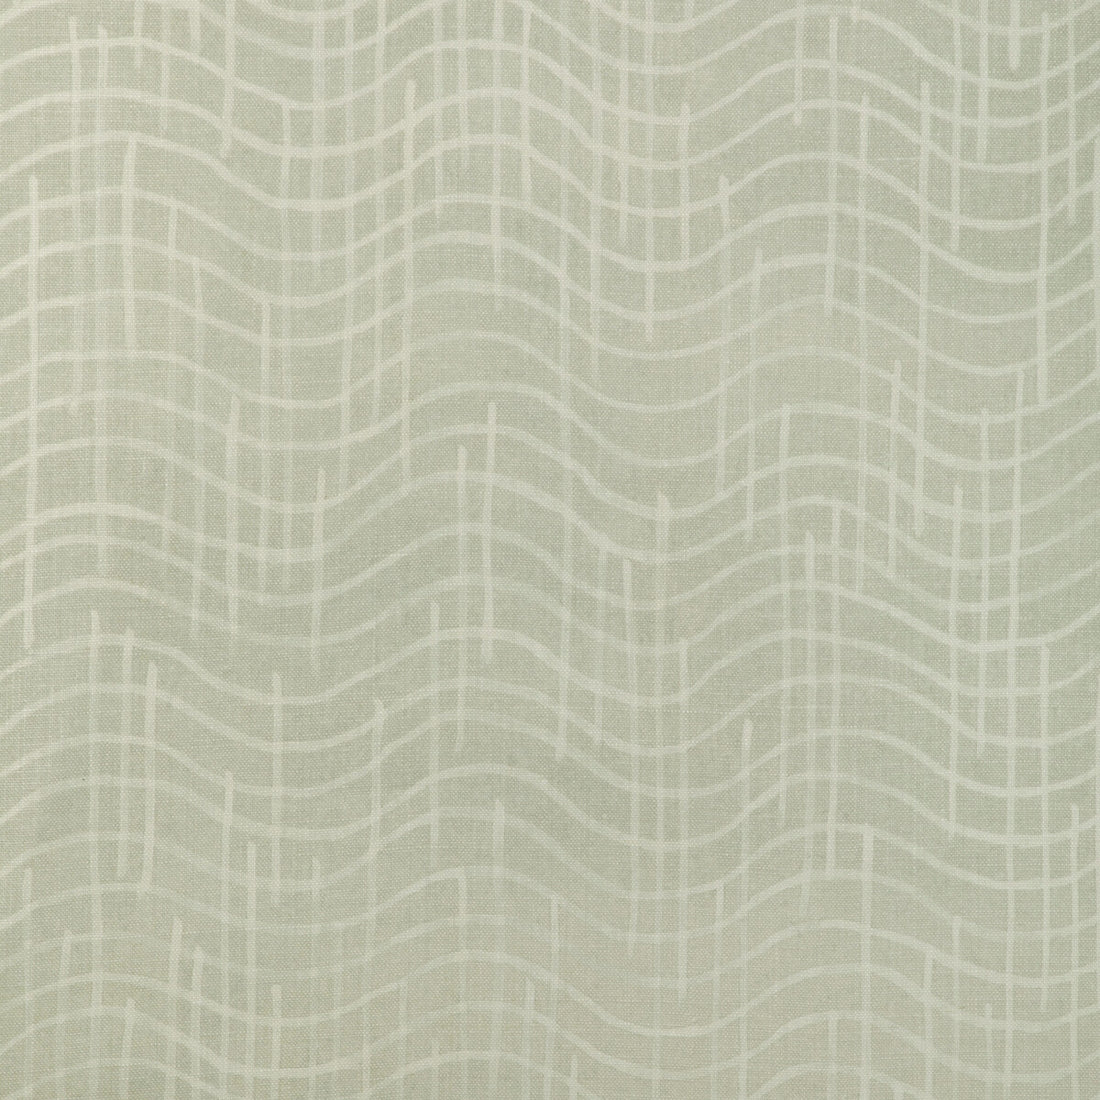 Dada fabric in chalk color - pattern GWF-3789.11.0 - by Lee Jofa Modern in the Kelly Wearstler VII collection